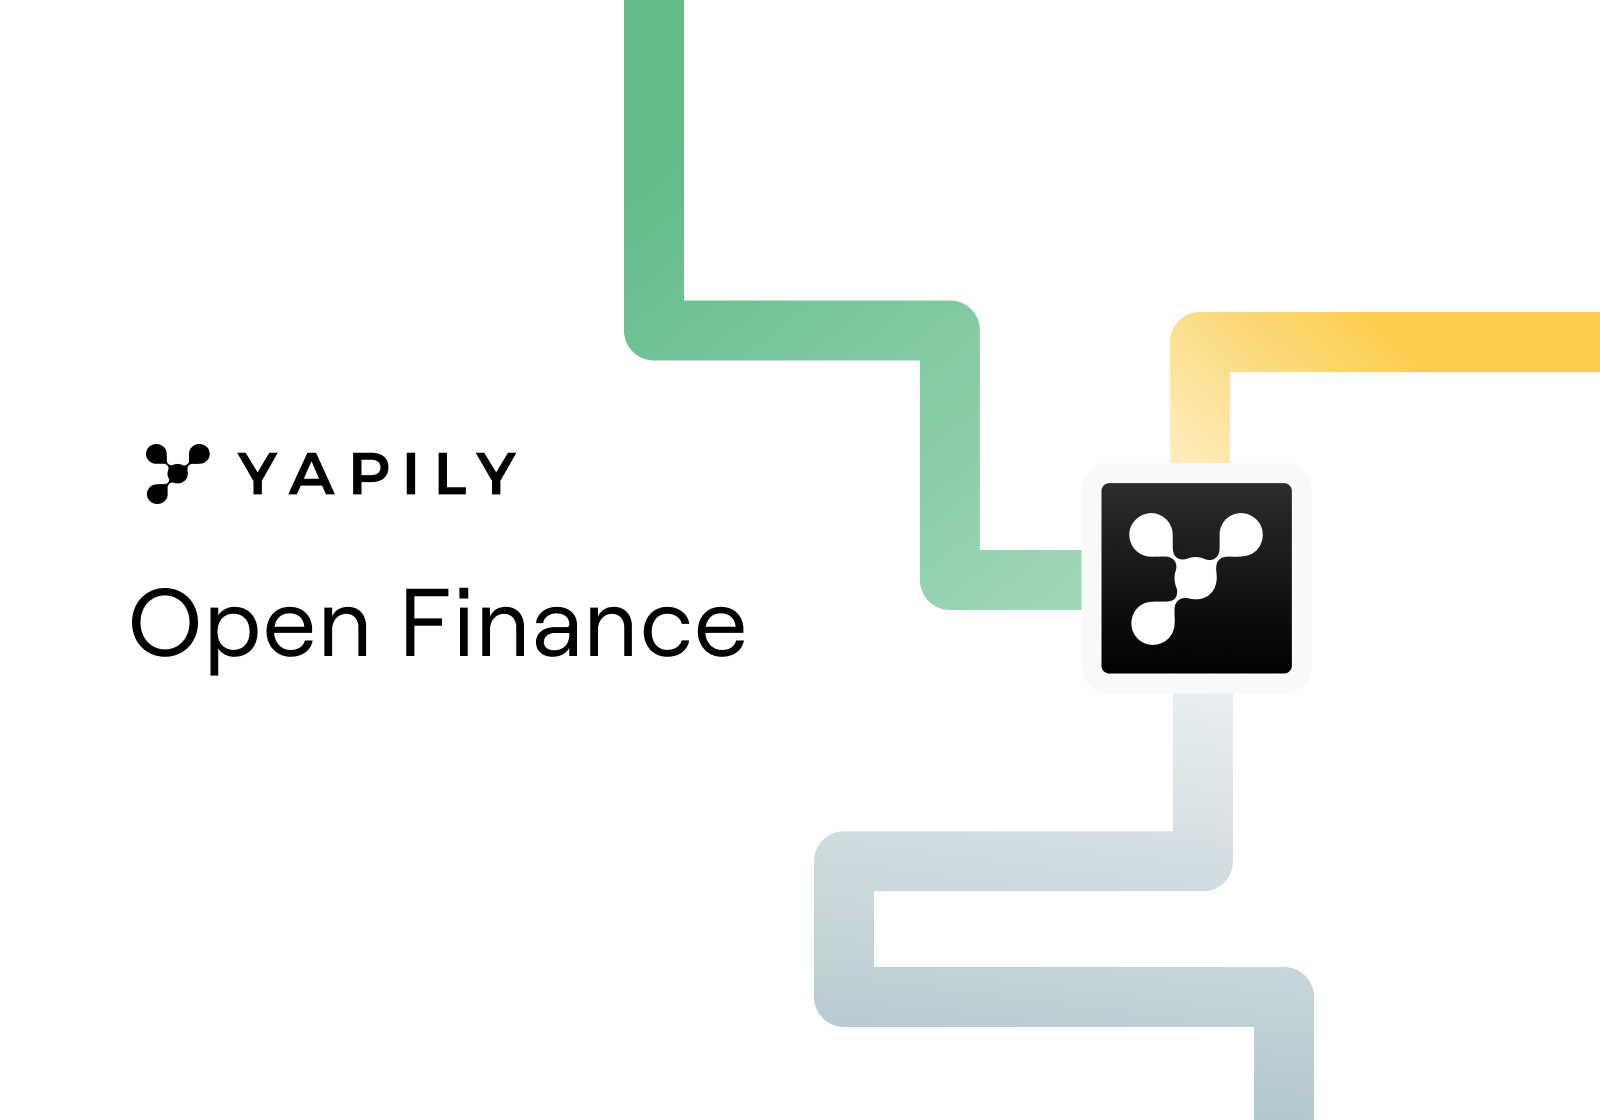 Open Finance is transforming financial services and spreading across further financial products and services. We explore some of the immediate use cases where open finance could make a difference right now.